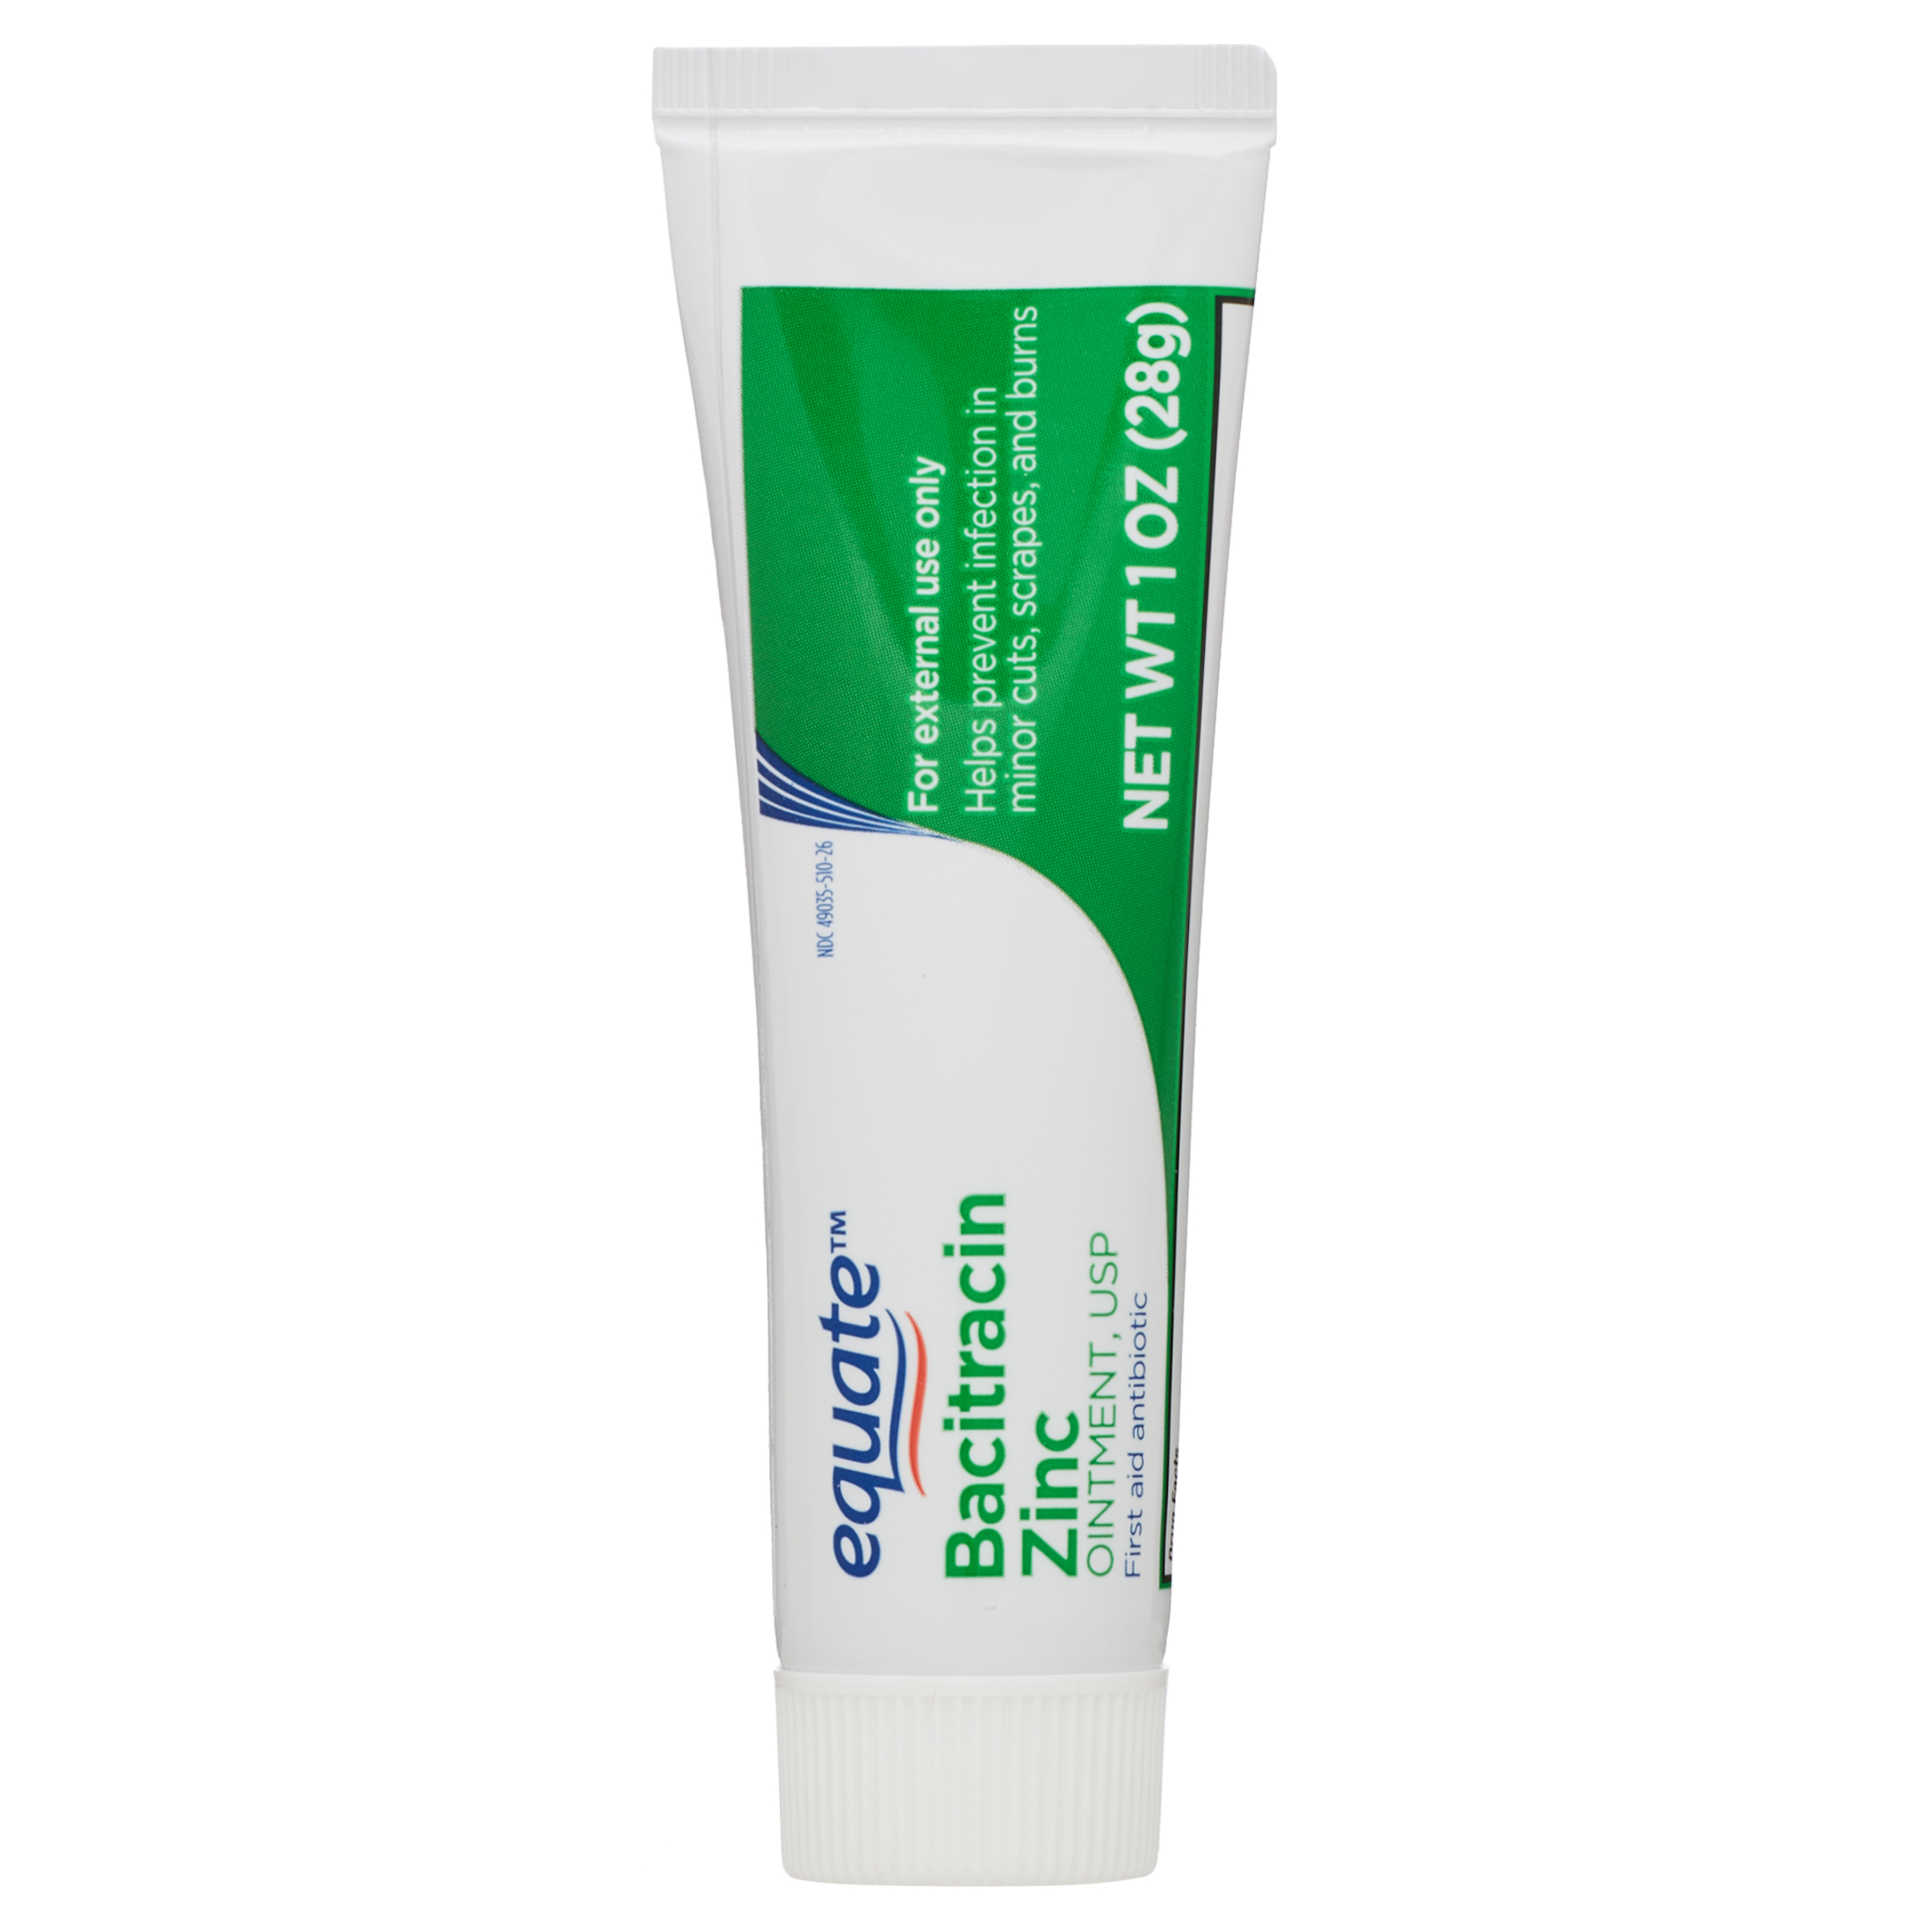 Equate Bacitracin Zinc USP Ointment, First Aid Antibiotic, 1 oz - image 3 of 8